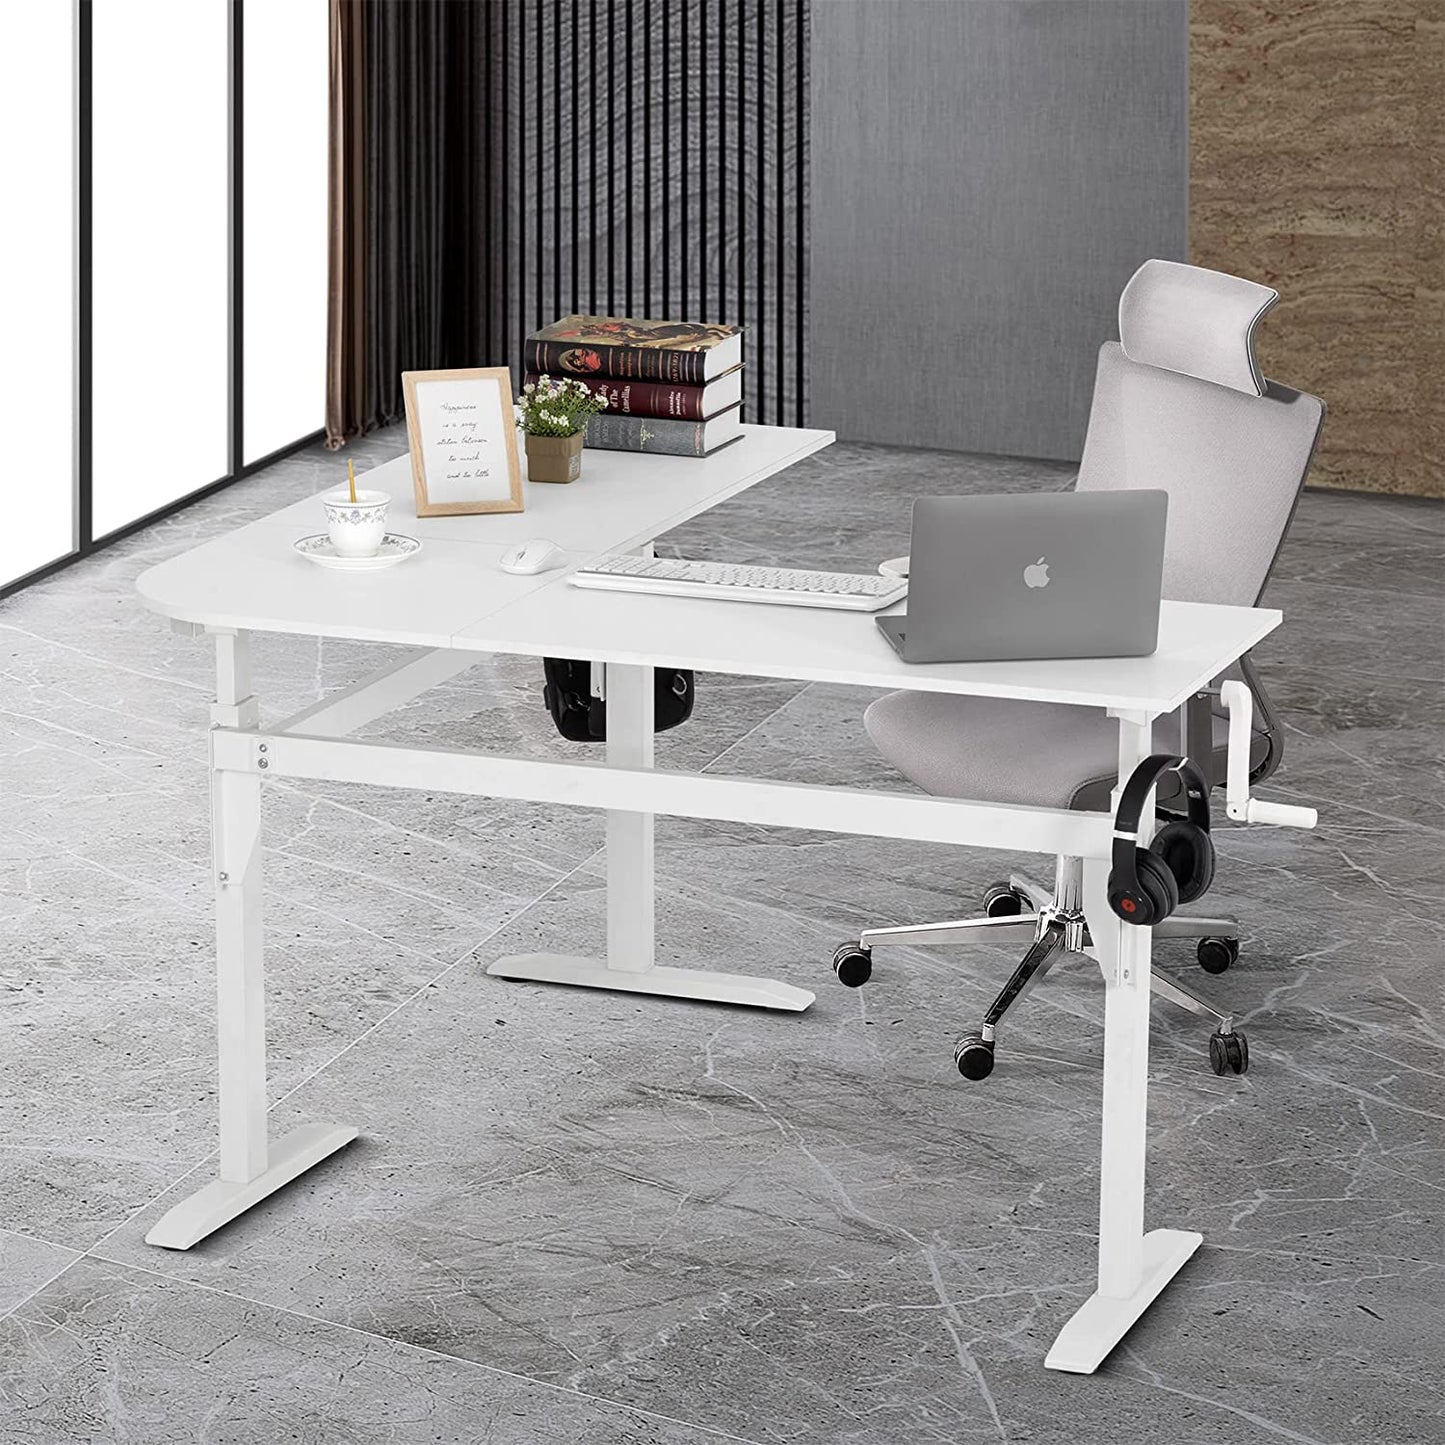 UNICOO – L Shaped Crank Height Adjustable Standing Desk, Sit to Stand up Corner Desk, L-Shaped Standing Workstation (XJH-LC-White-2 Packages)